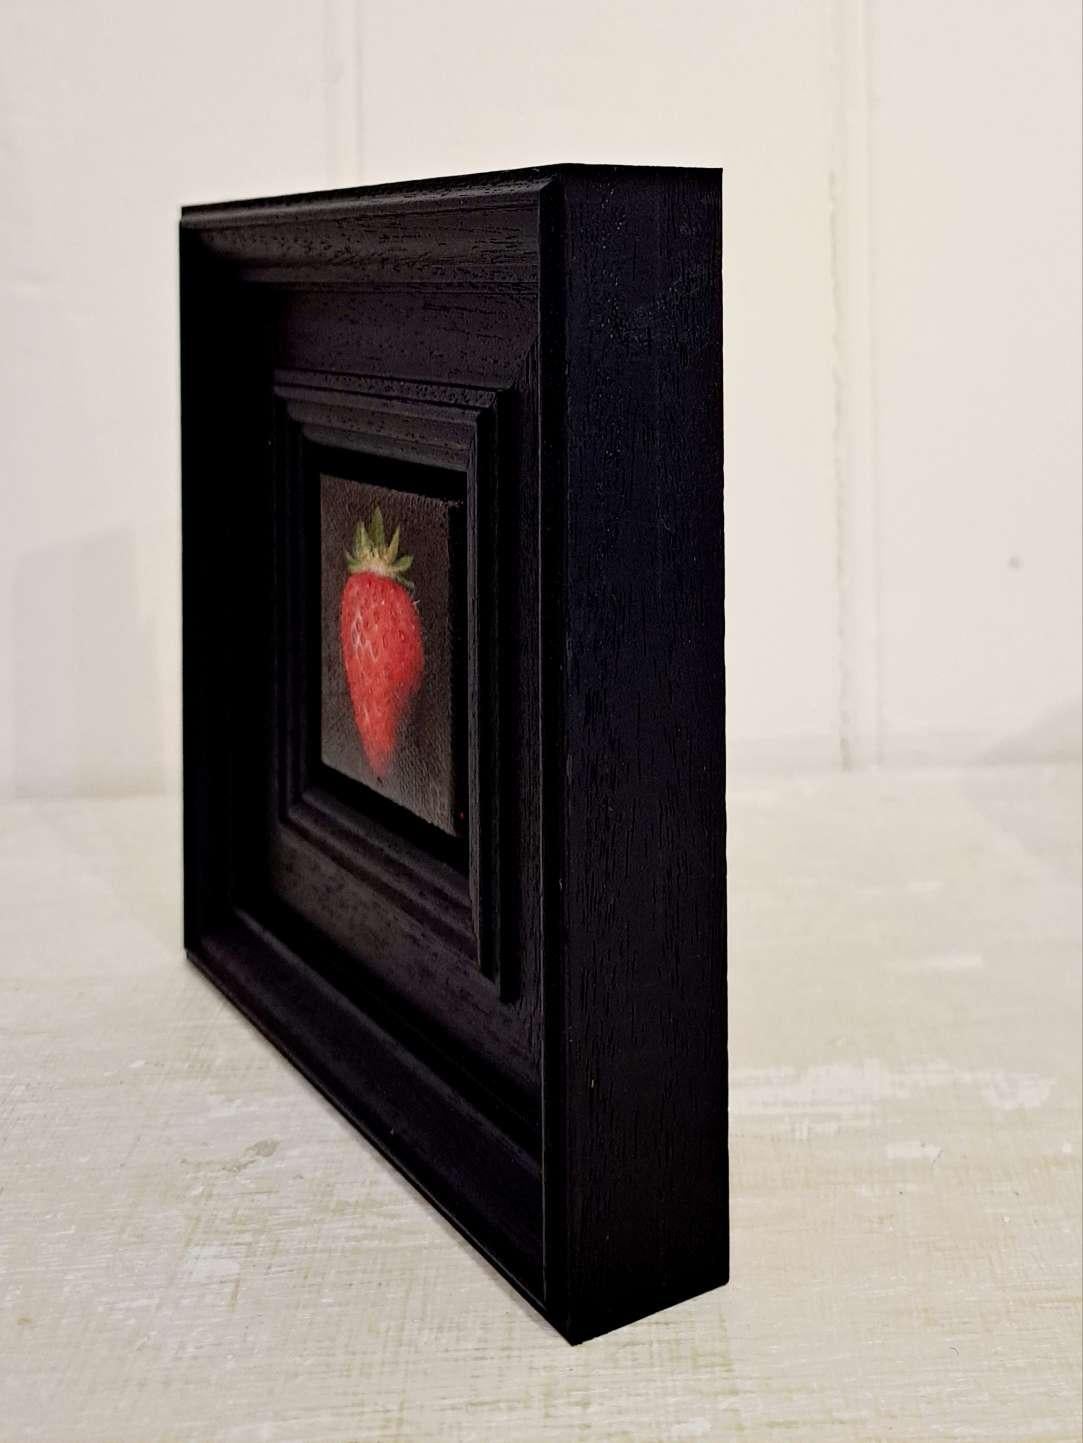 Pocket Red Strawberry, Baroque Style Painting, Still Life Painting, Fruit Art 2